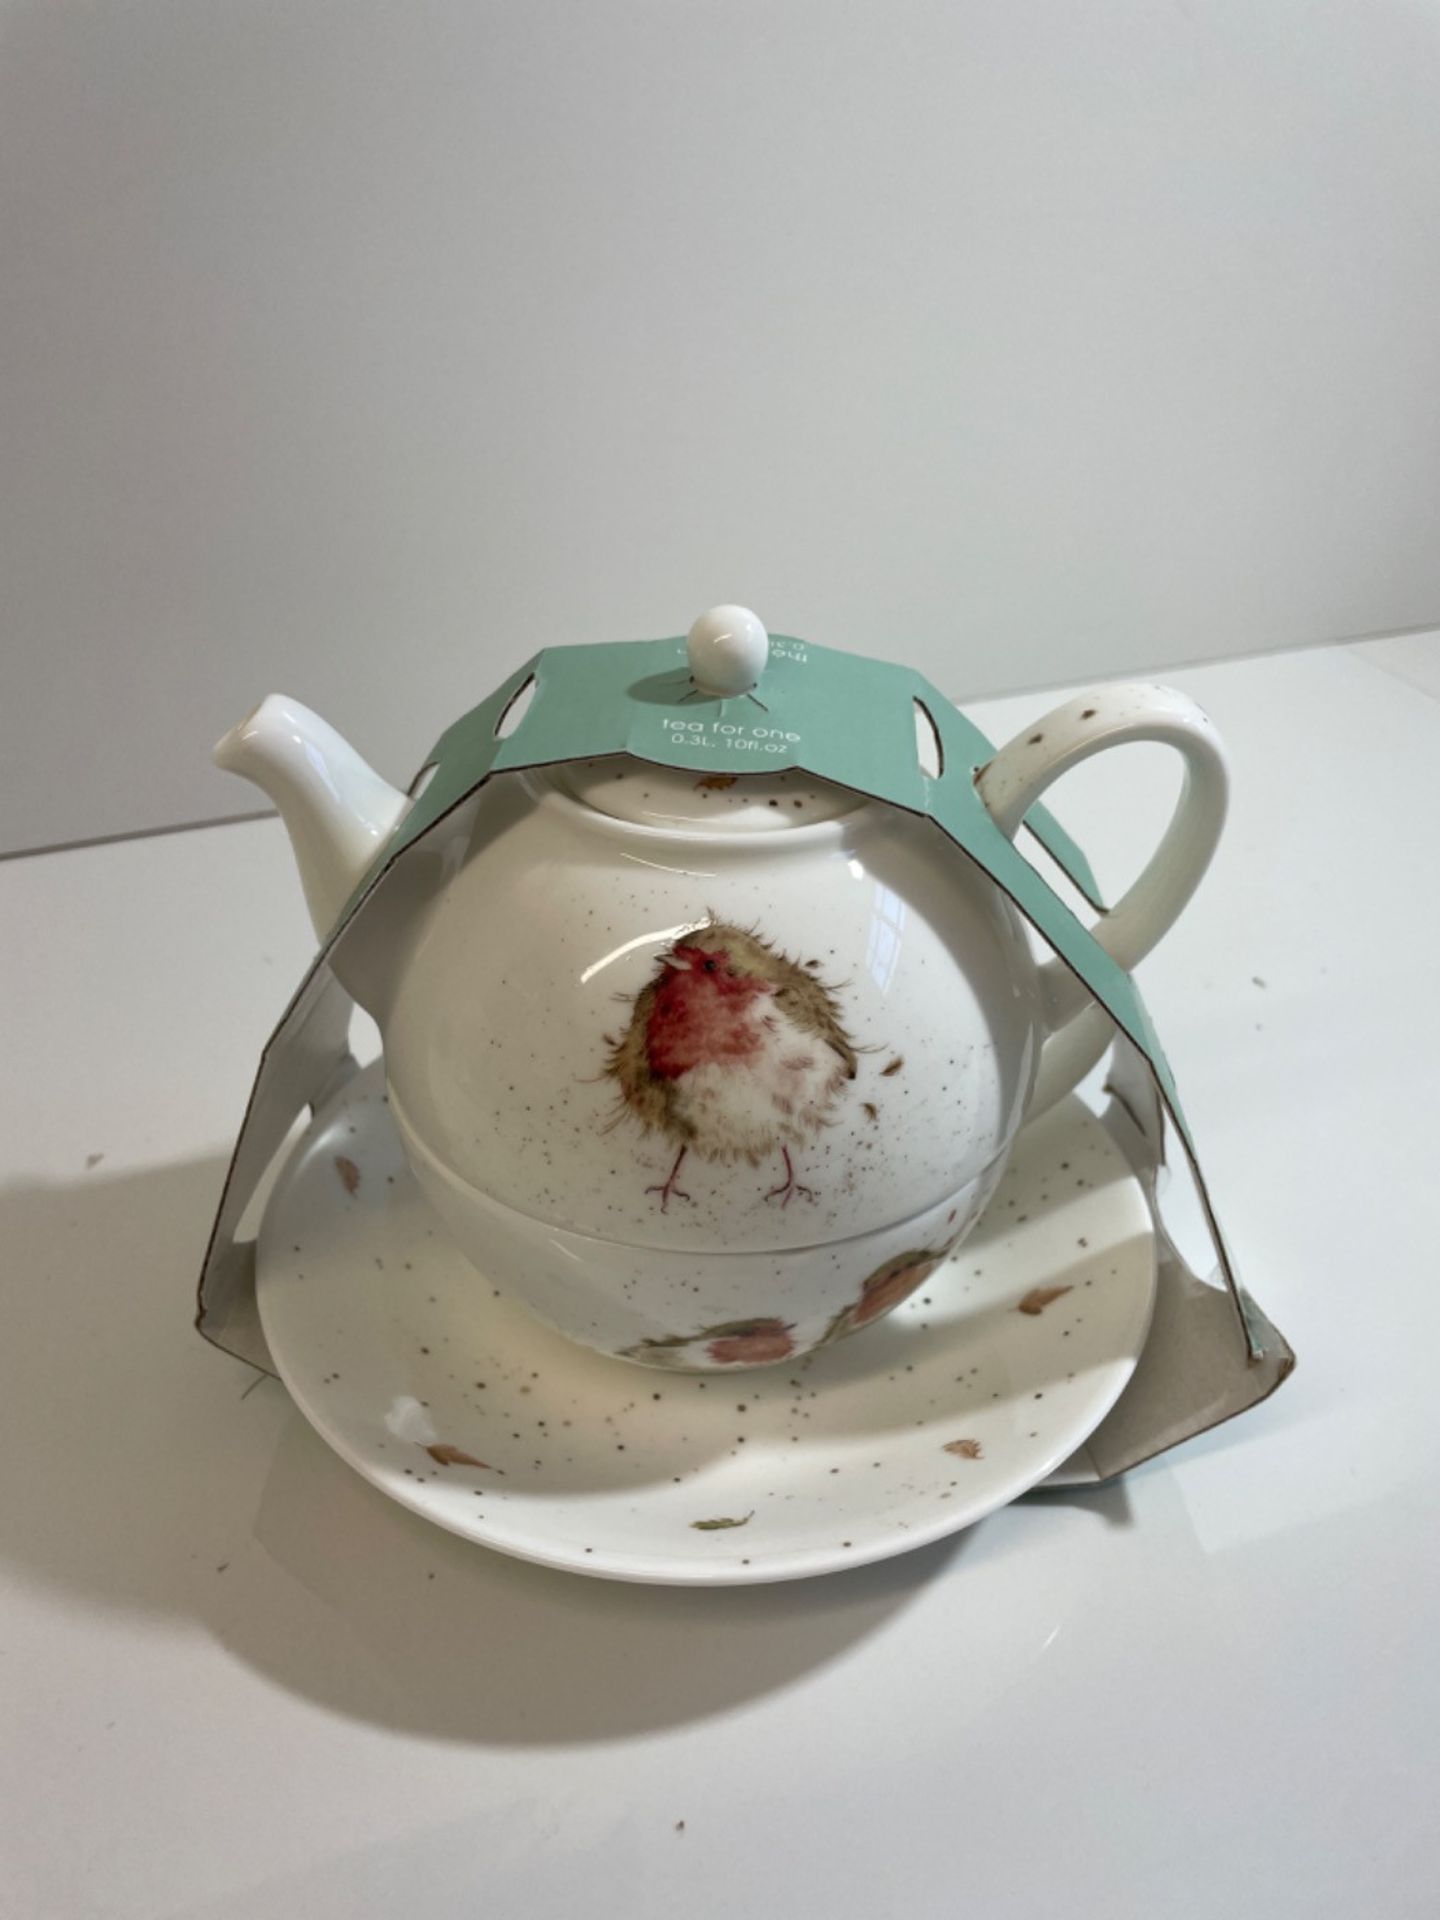 Portmeirion Home & Gifts Wrendale Tea For One With Saucer (Robins), Bone China, Multi Coloured, 1... - Image 2 of 2